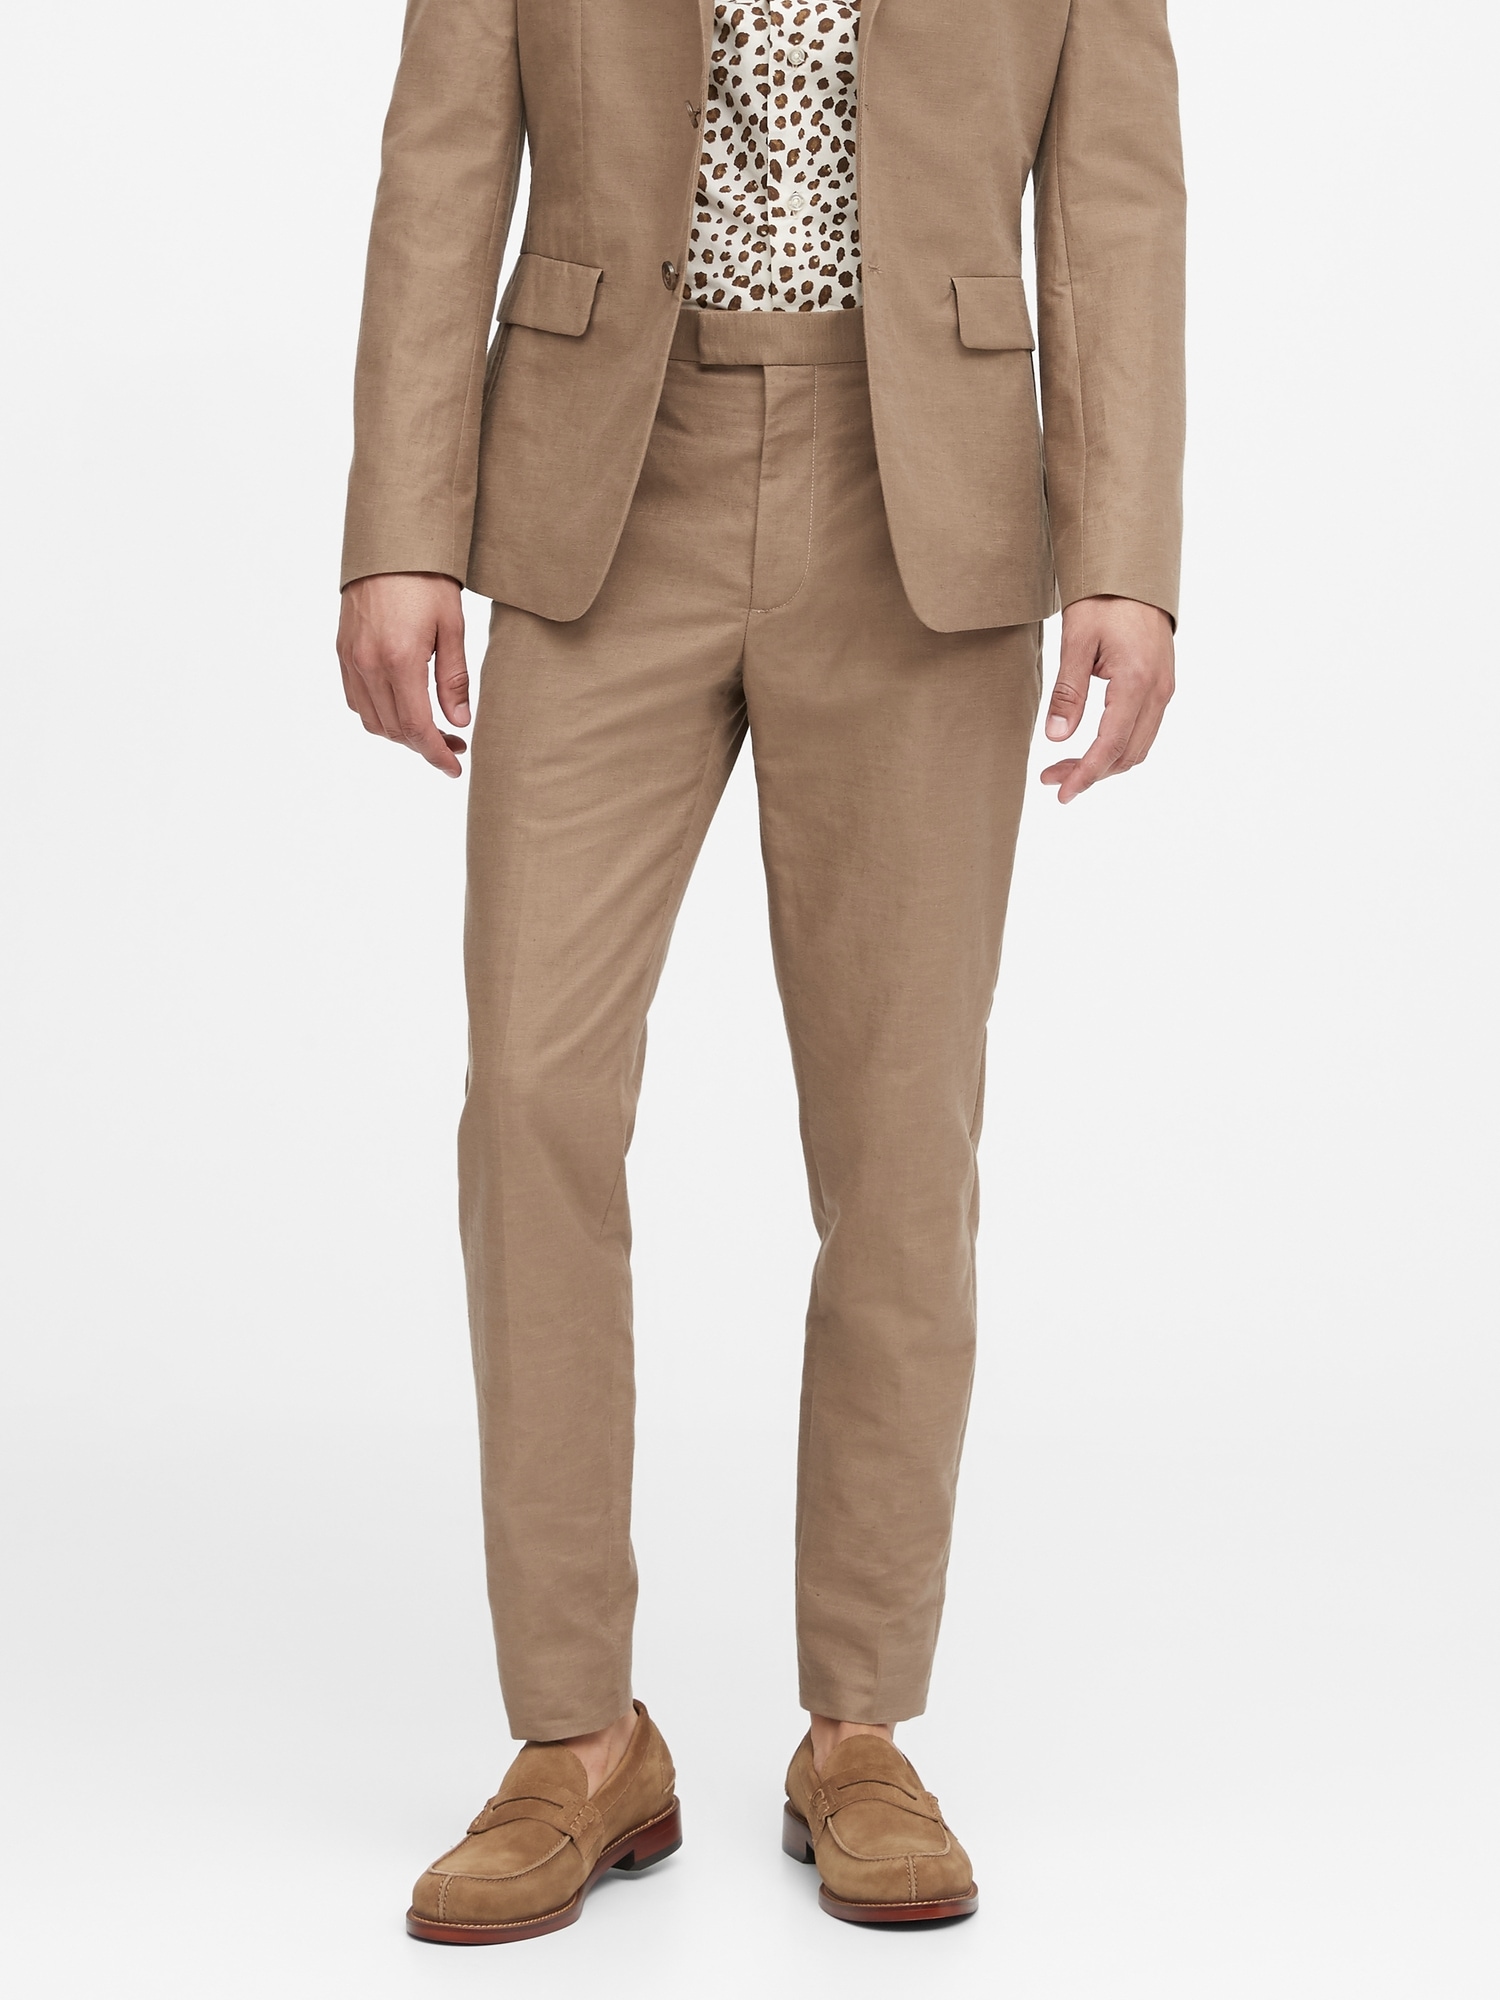 tapered suit pants mens